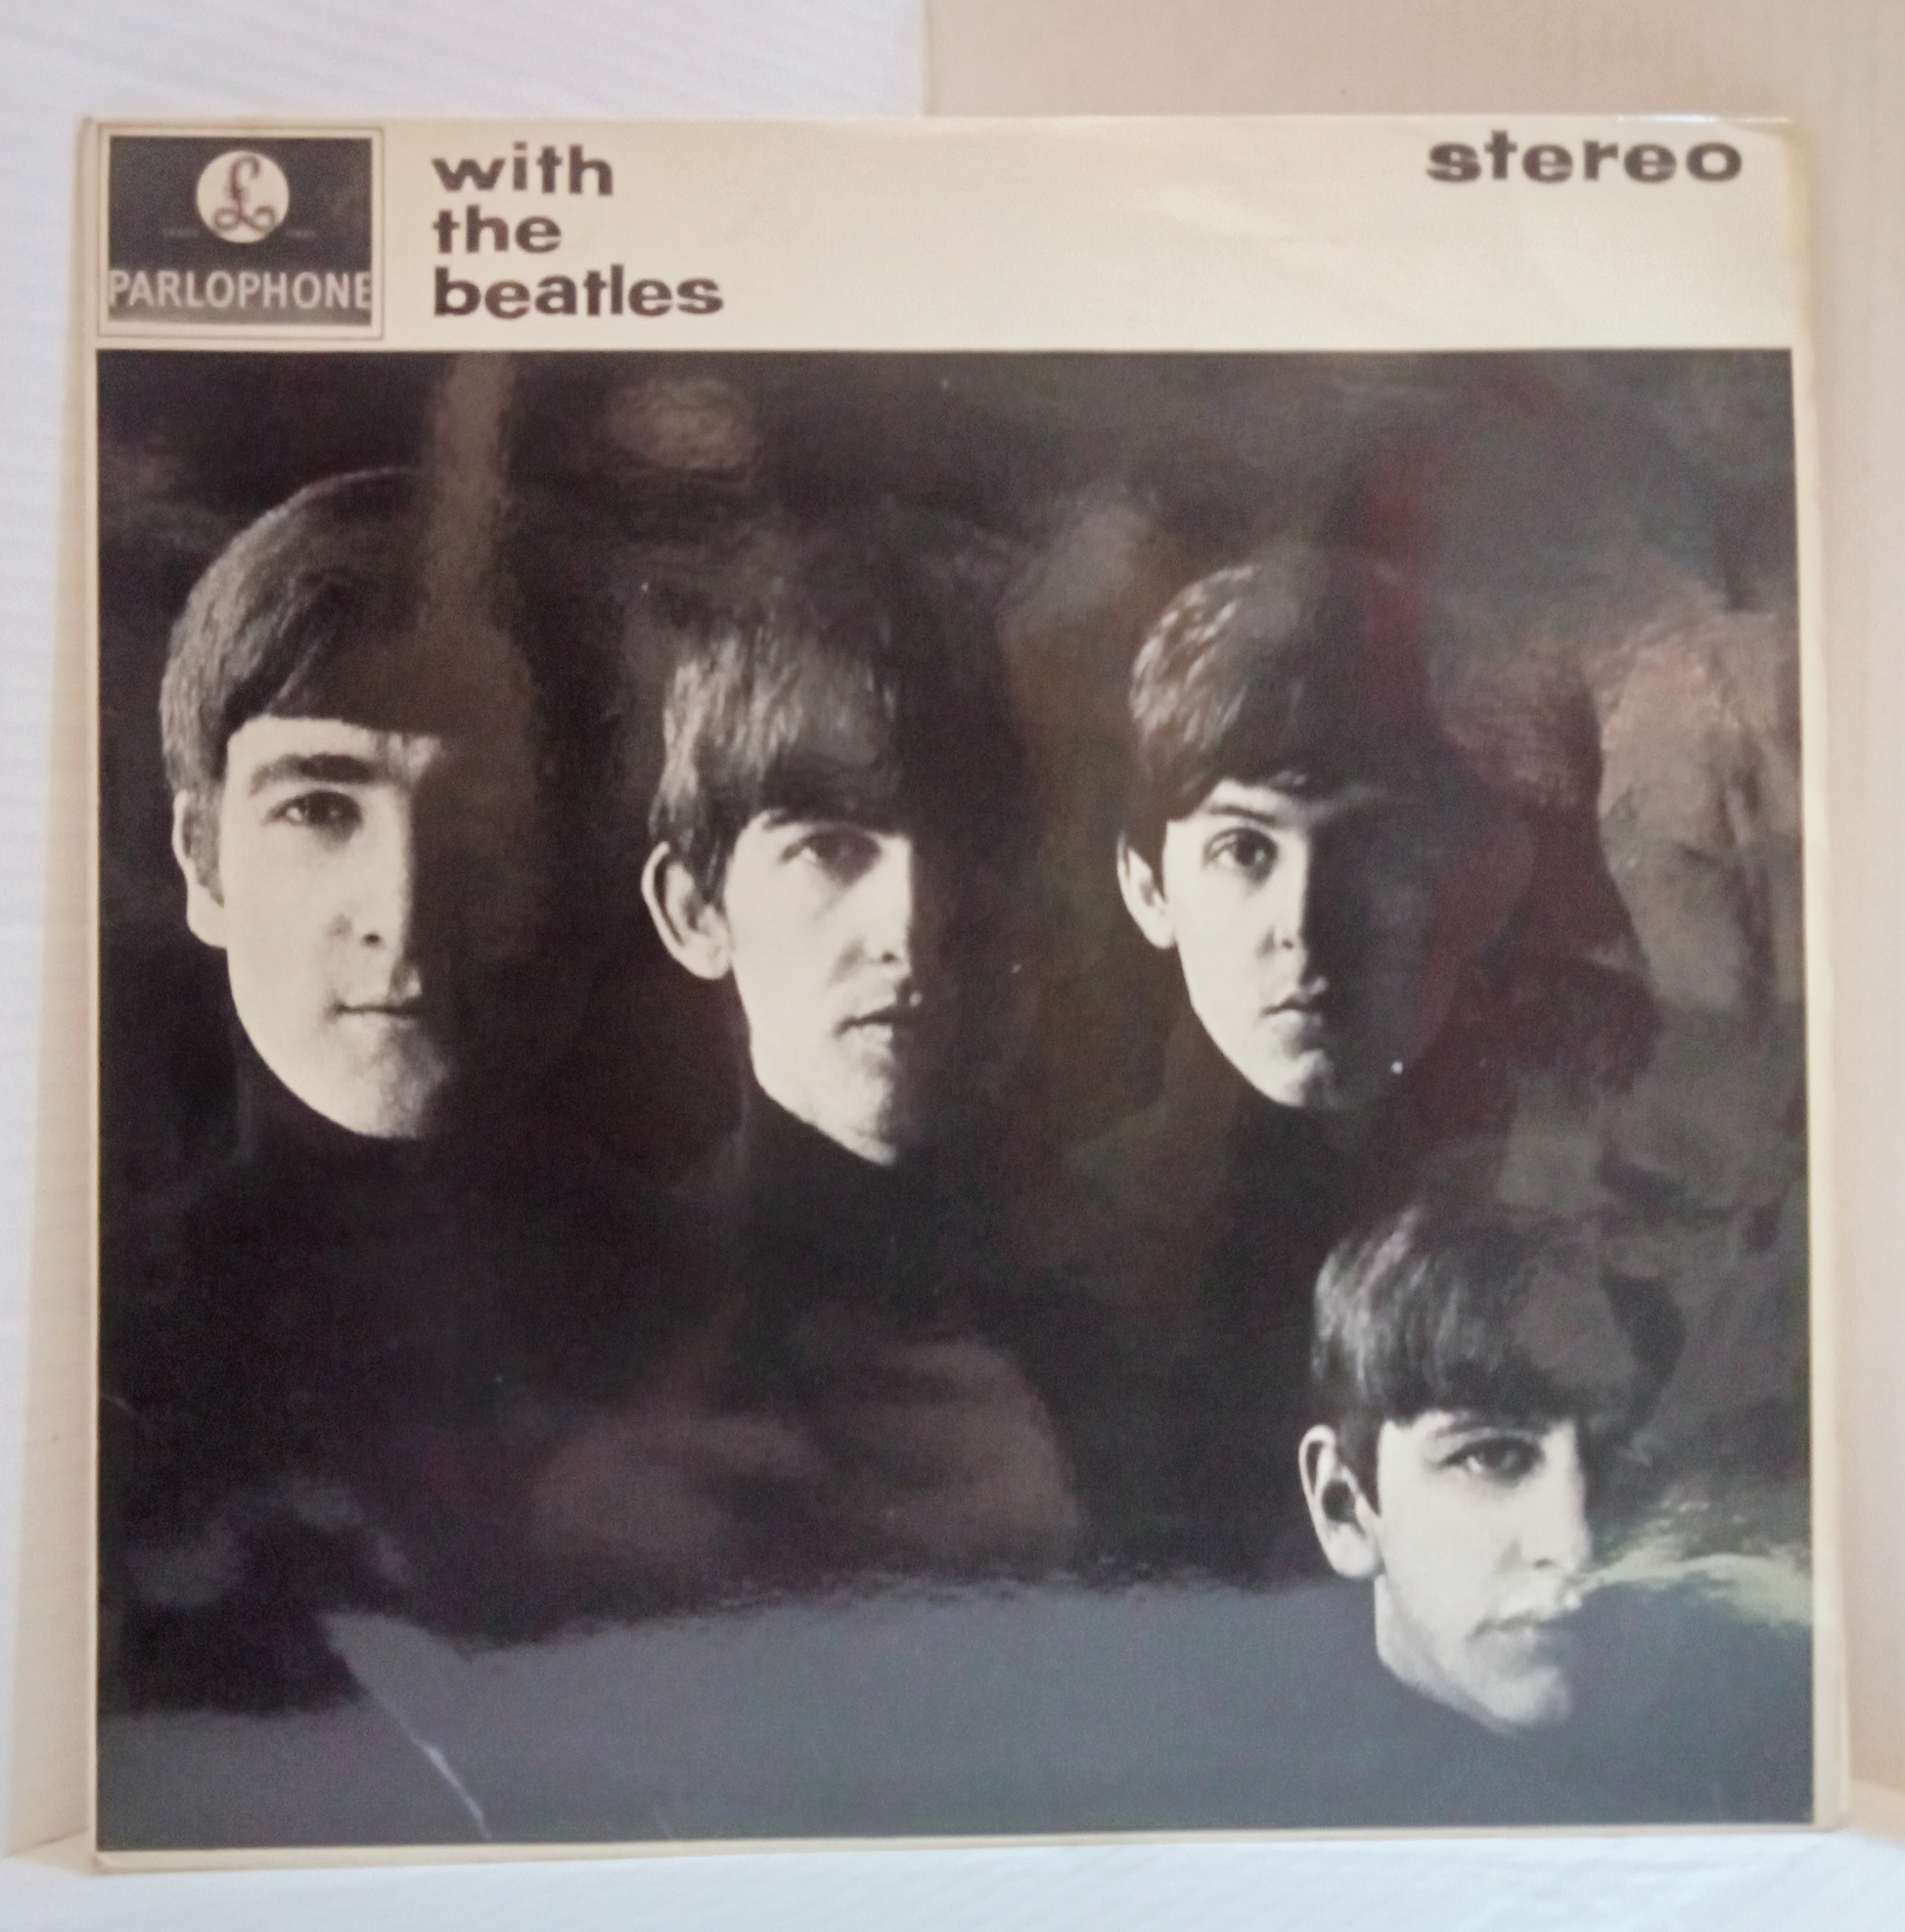 The Beatles With The Beatles PCS 3045 Stereo Black & Yellow Parlophone Label. First pressing